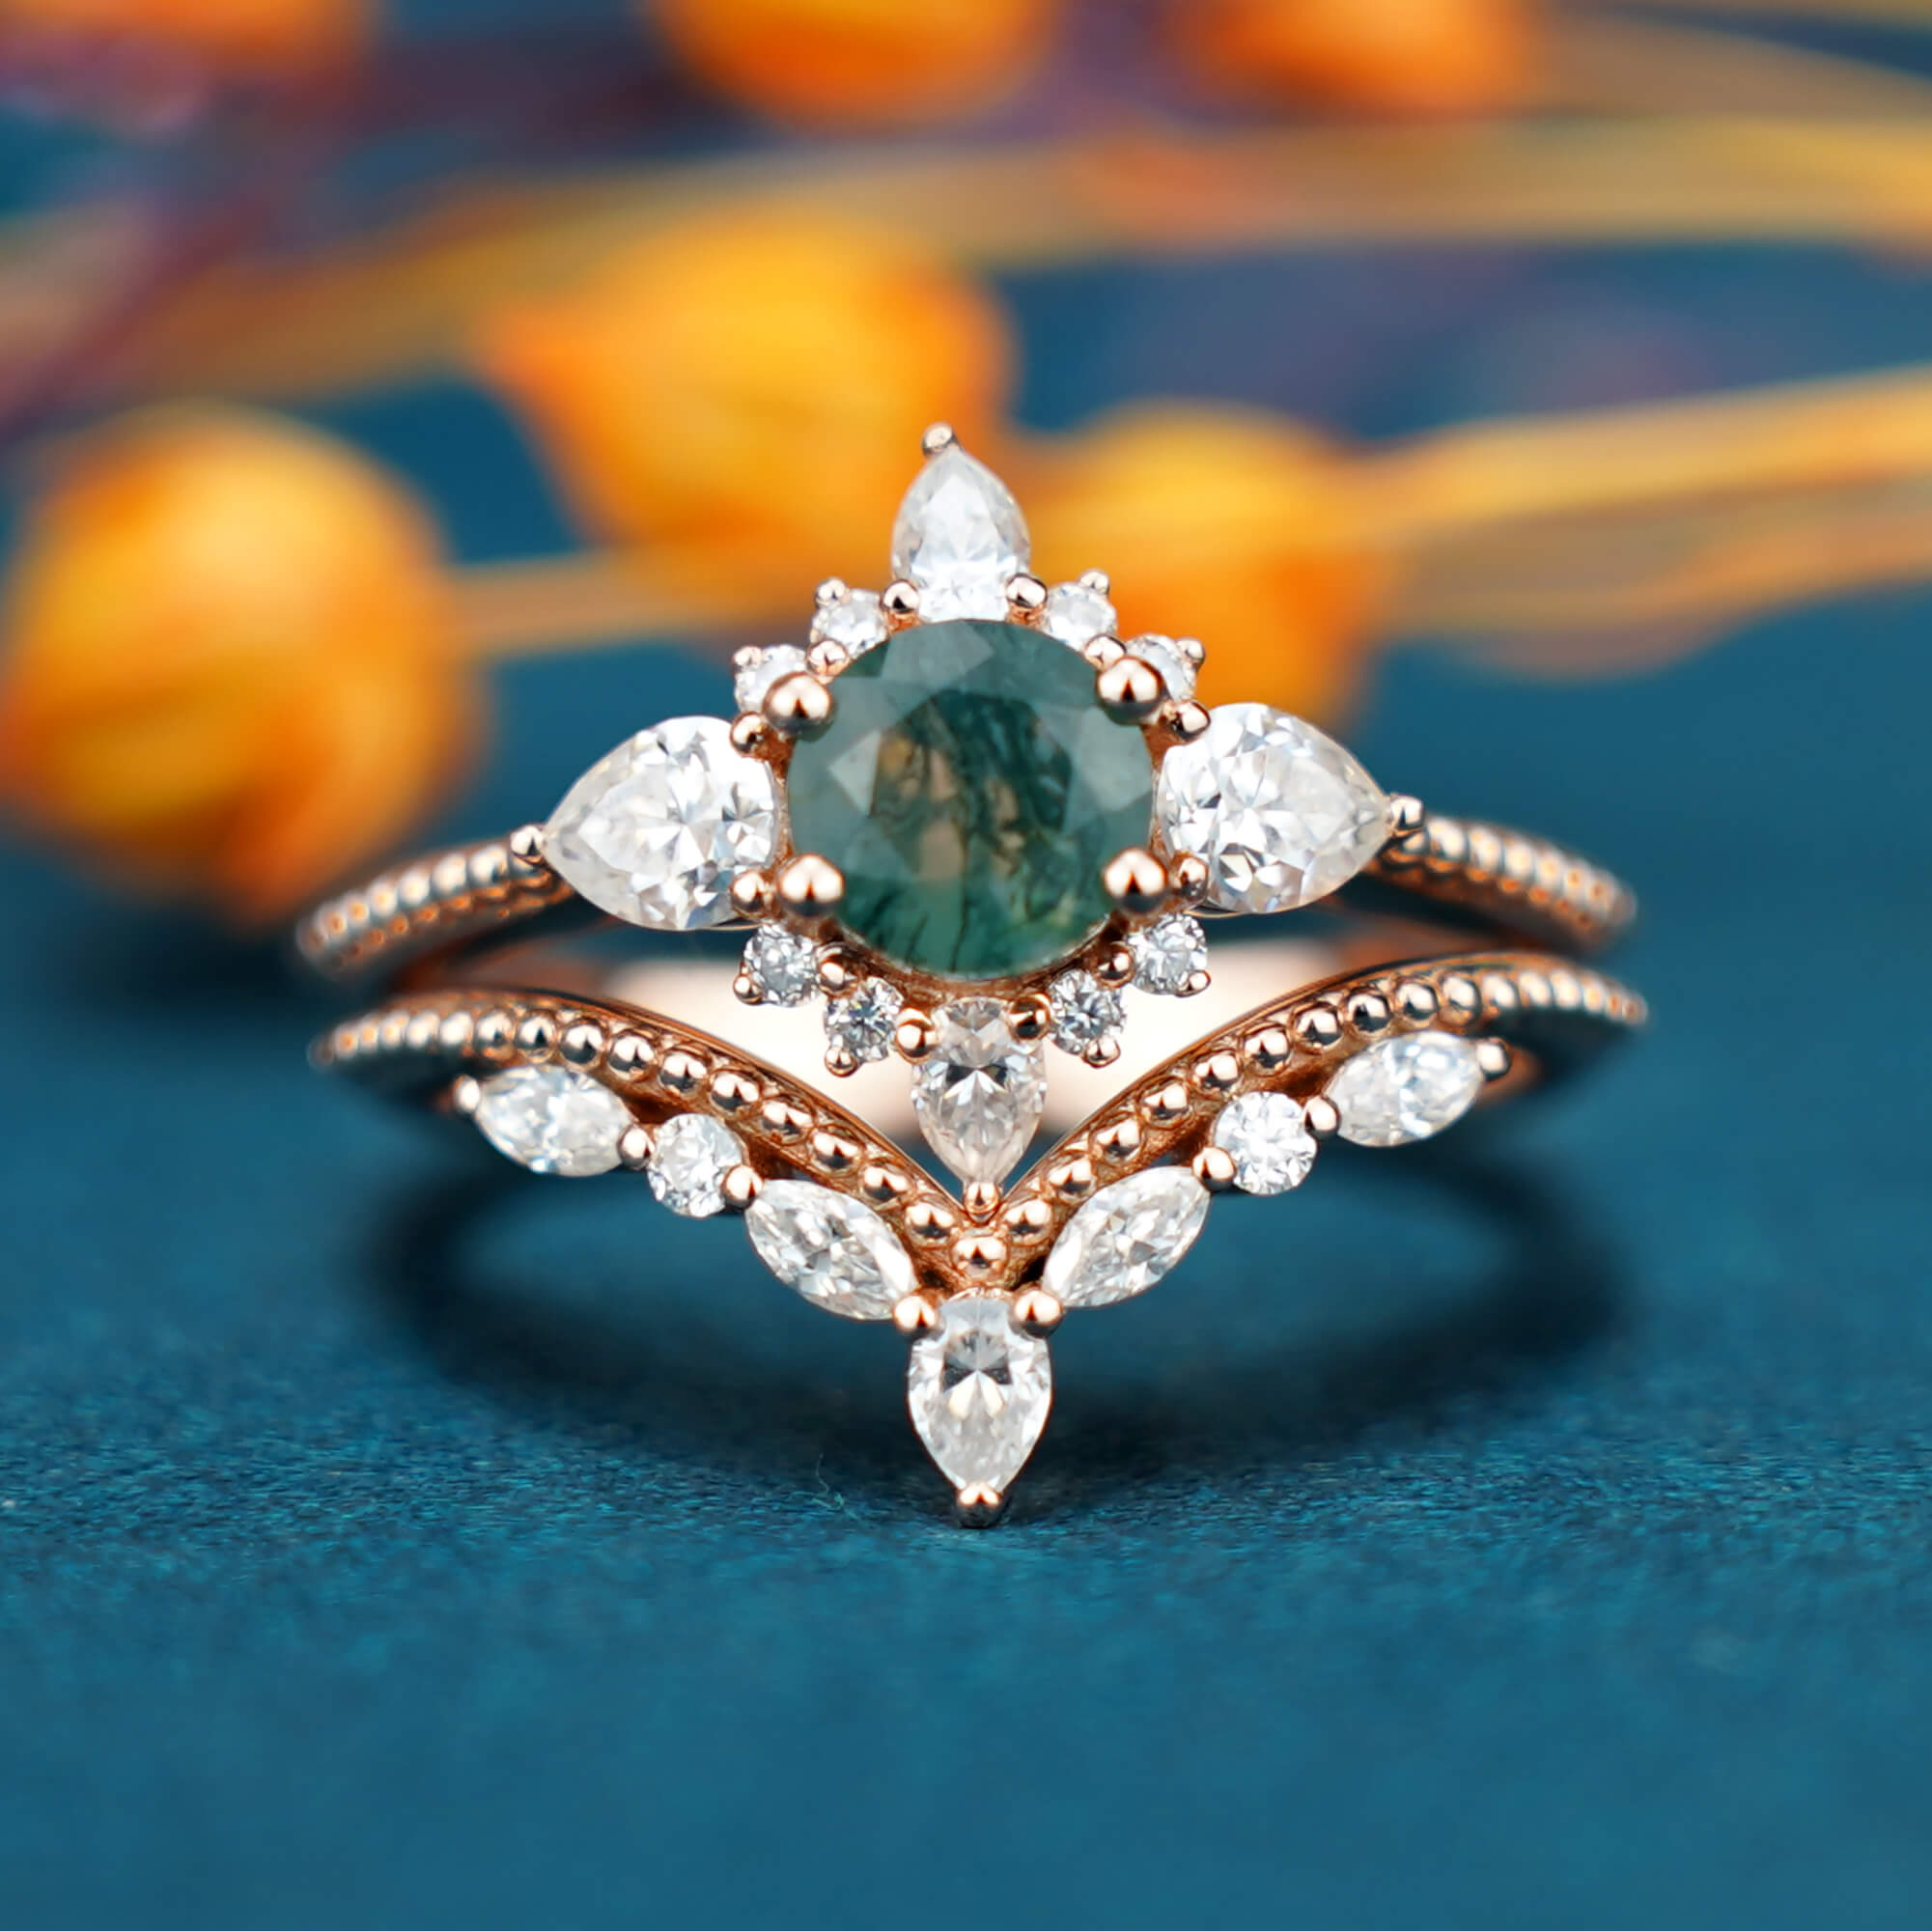 Solflora Agate Ring - Vintage Sunflower-Inspired, Round-Cut Moss Agate with Moissanite Halo, Unique Rose Gold Engagement Ring Set